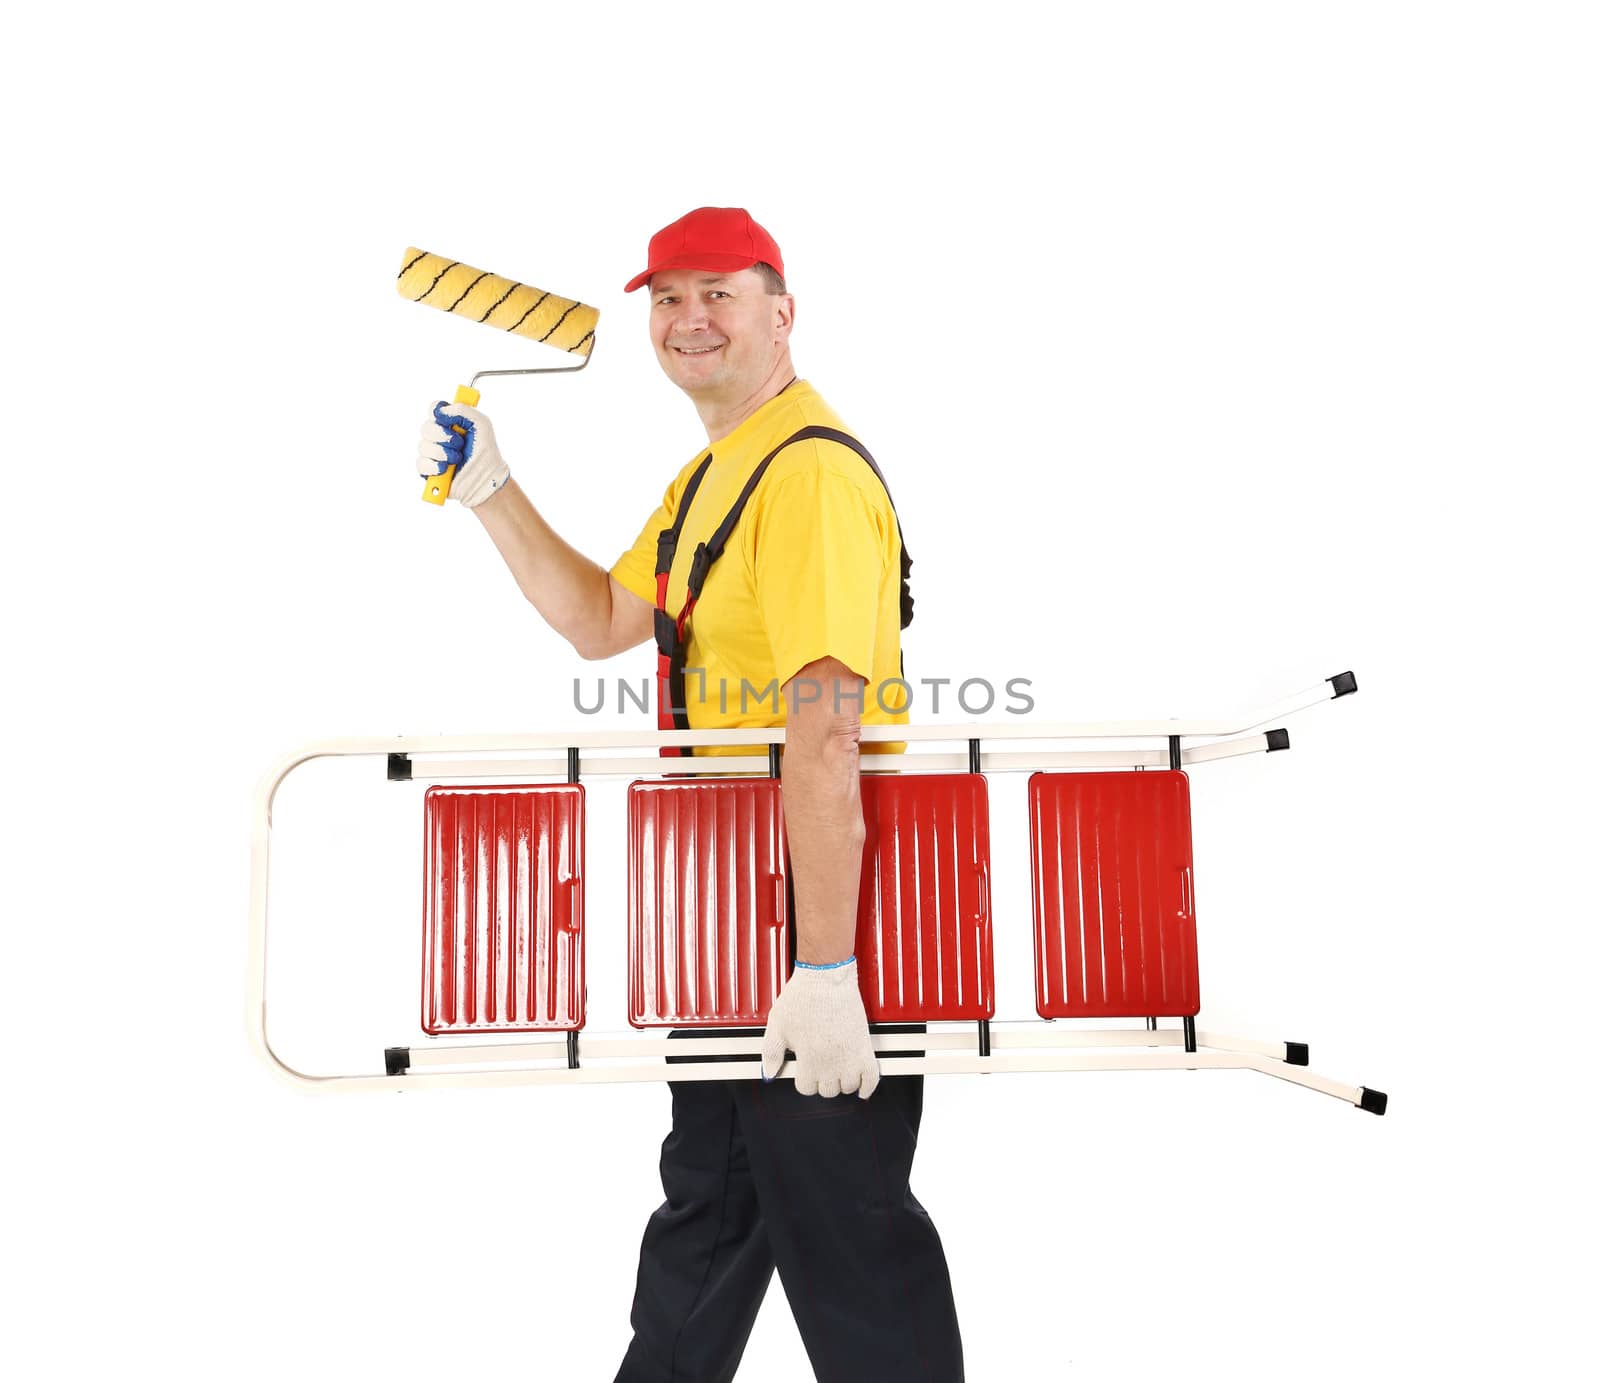 Worker with ladder and roll. by indigolotos